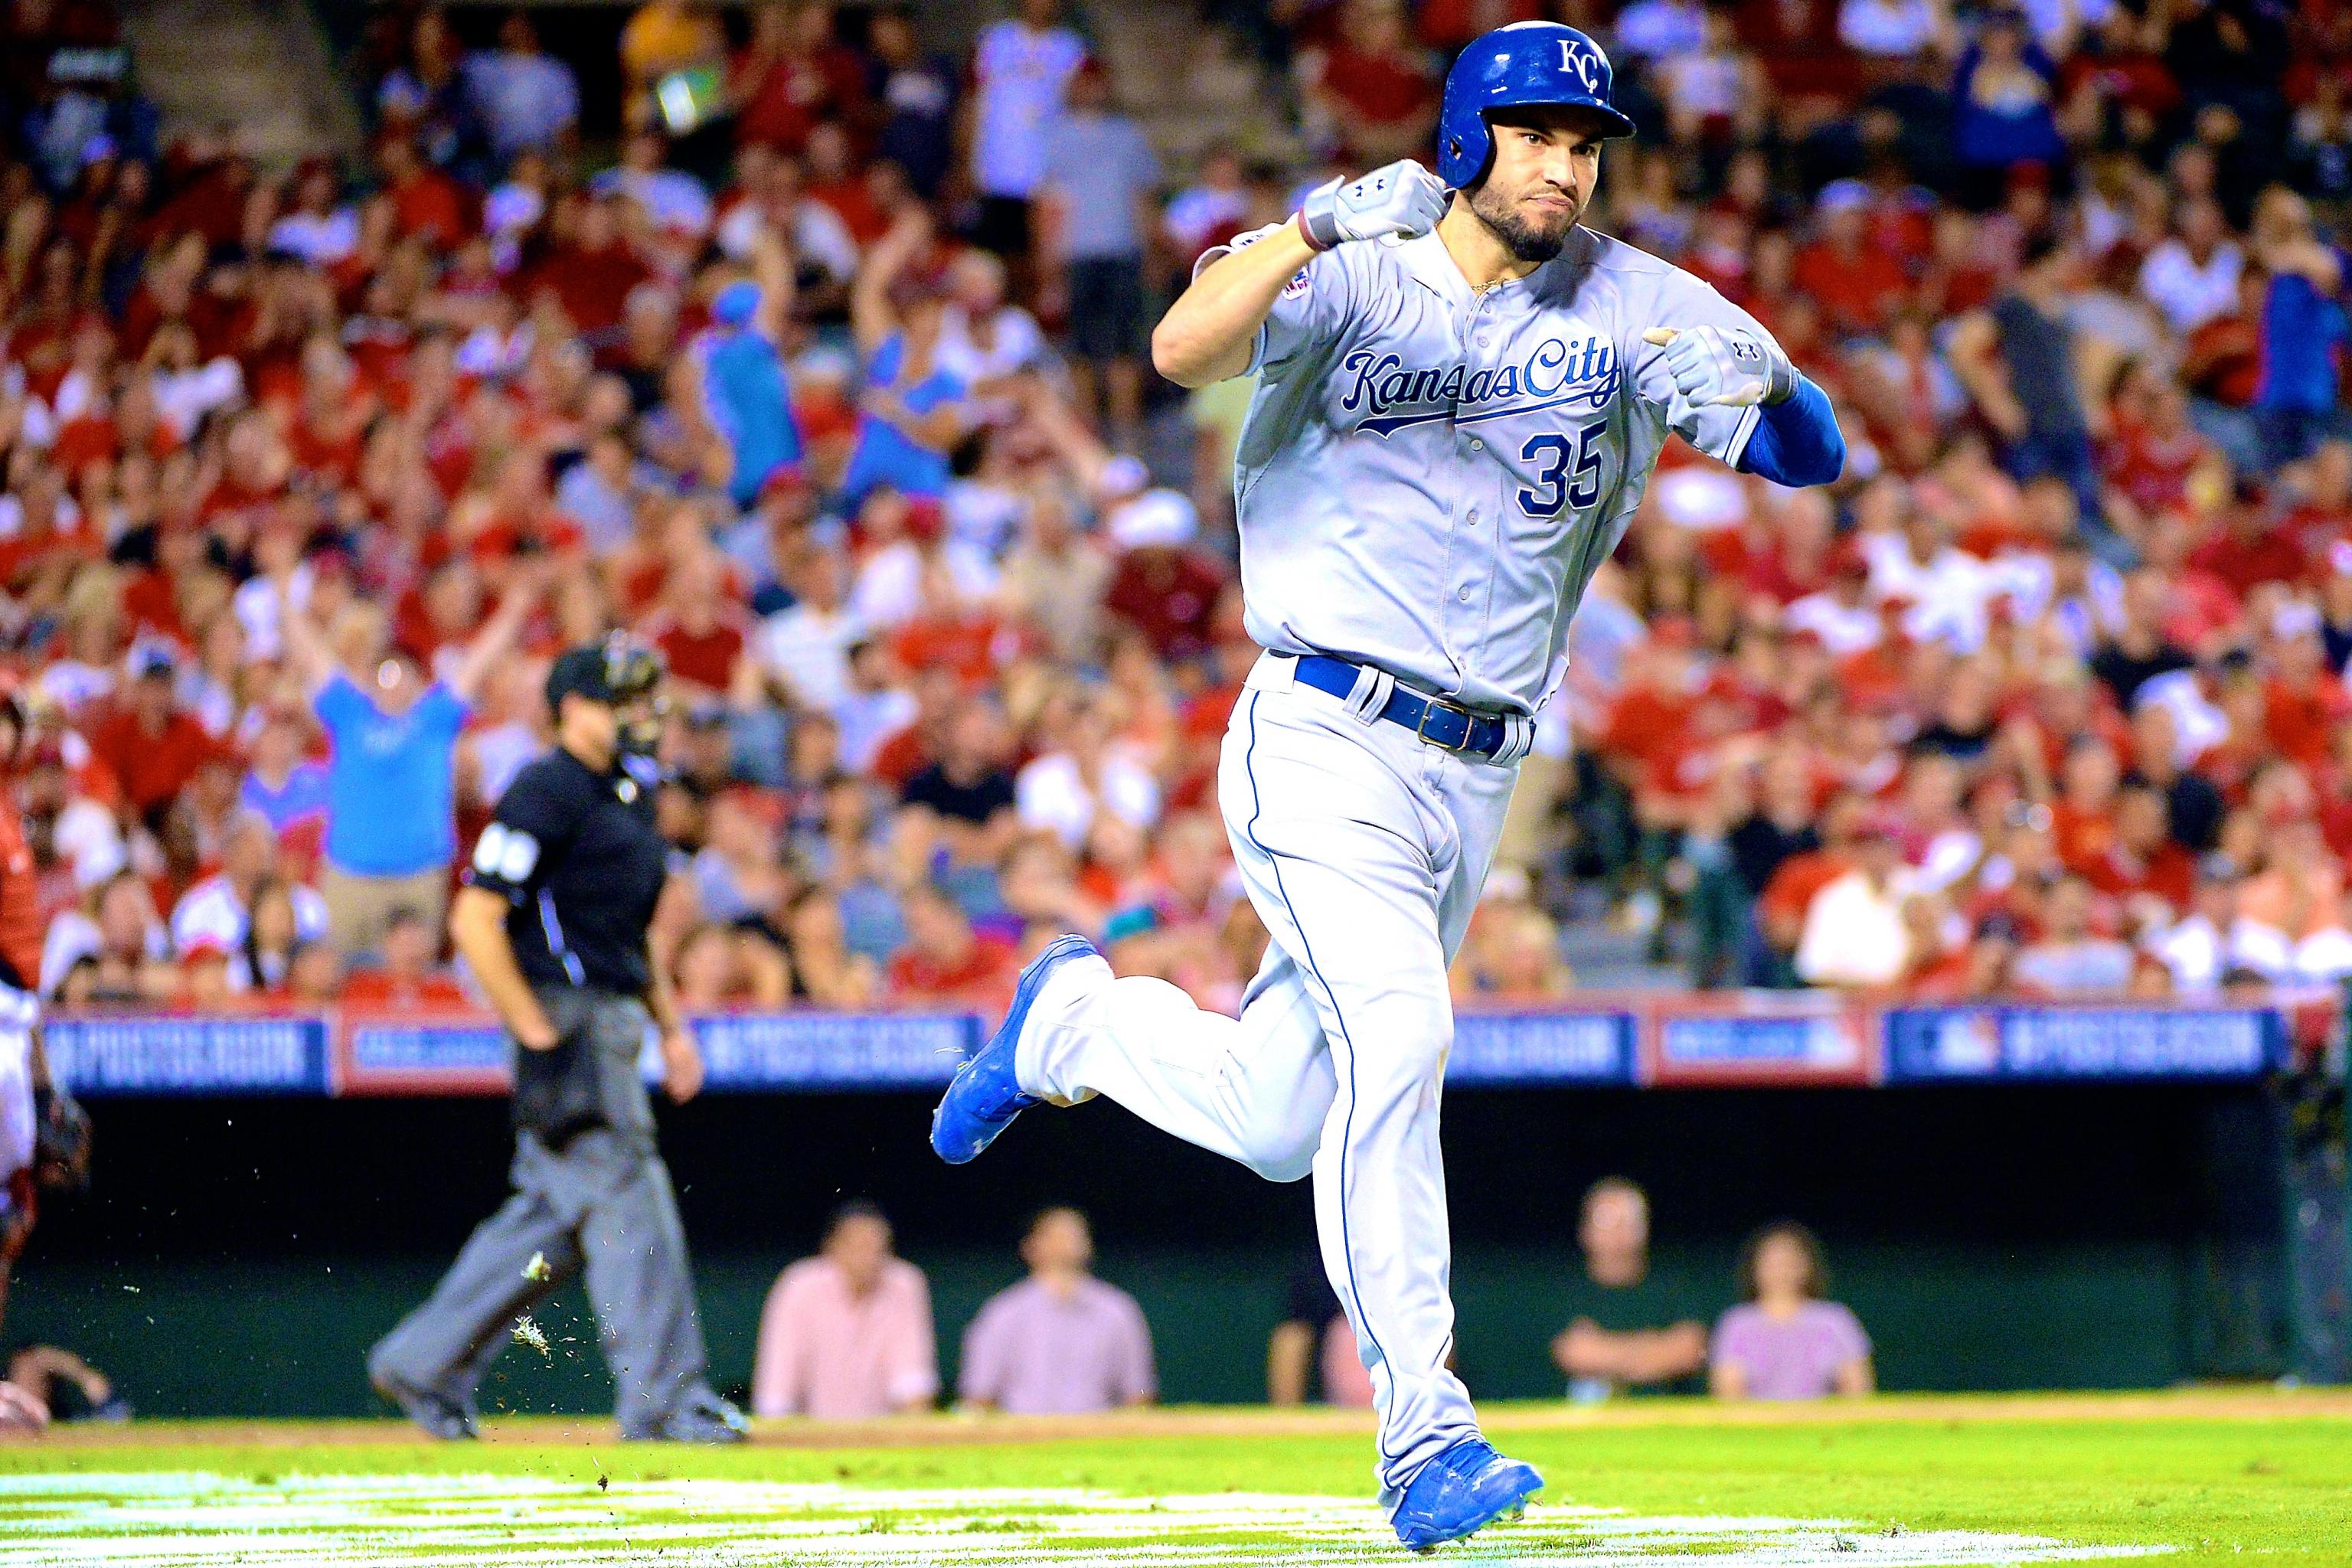 WORLD SERIES: Royals jump to 2-0 lead in series